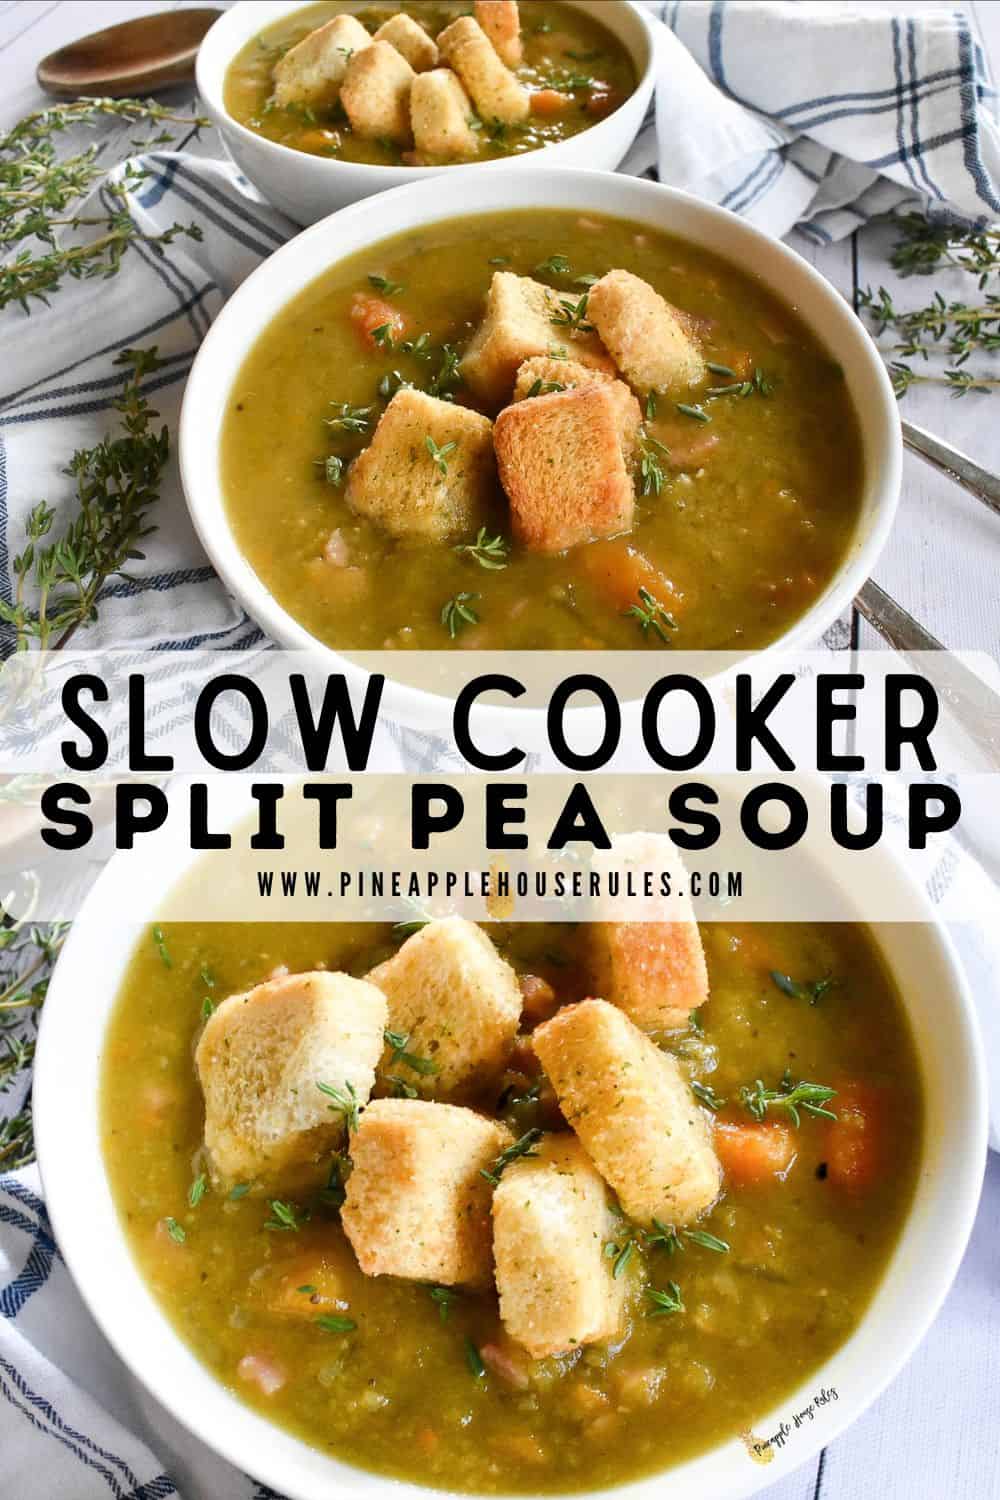 This Slow Cooker Split Pea Soup is a perfect dump-and-go recipe for an easy lunch or dinner. It's a delicious and healthy meal that will leave your taste buds and waistline very happy! It also freezes very well for easy meal prep. Slow Cooker Split Pea Soup | Slow Cooker Split Pea Soup with Ham | split pea soup | split pea soup crockpot | split pea soup with ham | split pea soup recipe | split pea soup slow cooker | Slow Cooker Recipes | Slow Cooker Soup | Slow Cooker Soup Recipes | Soup Ideas